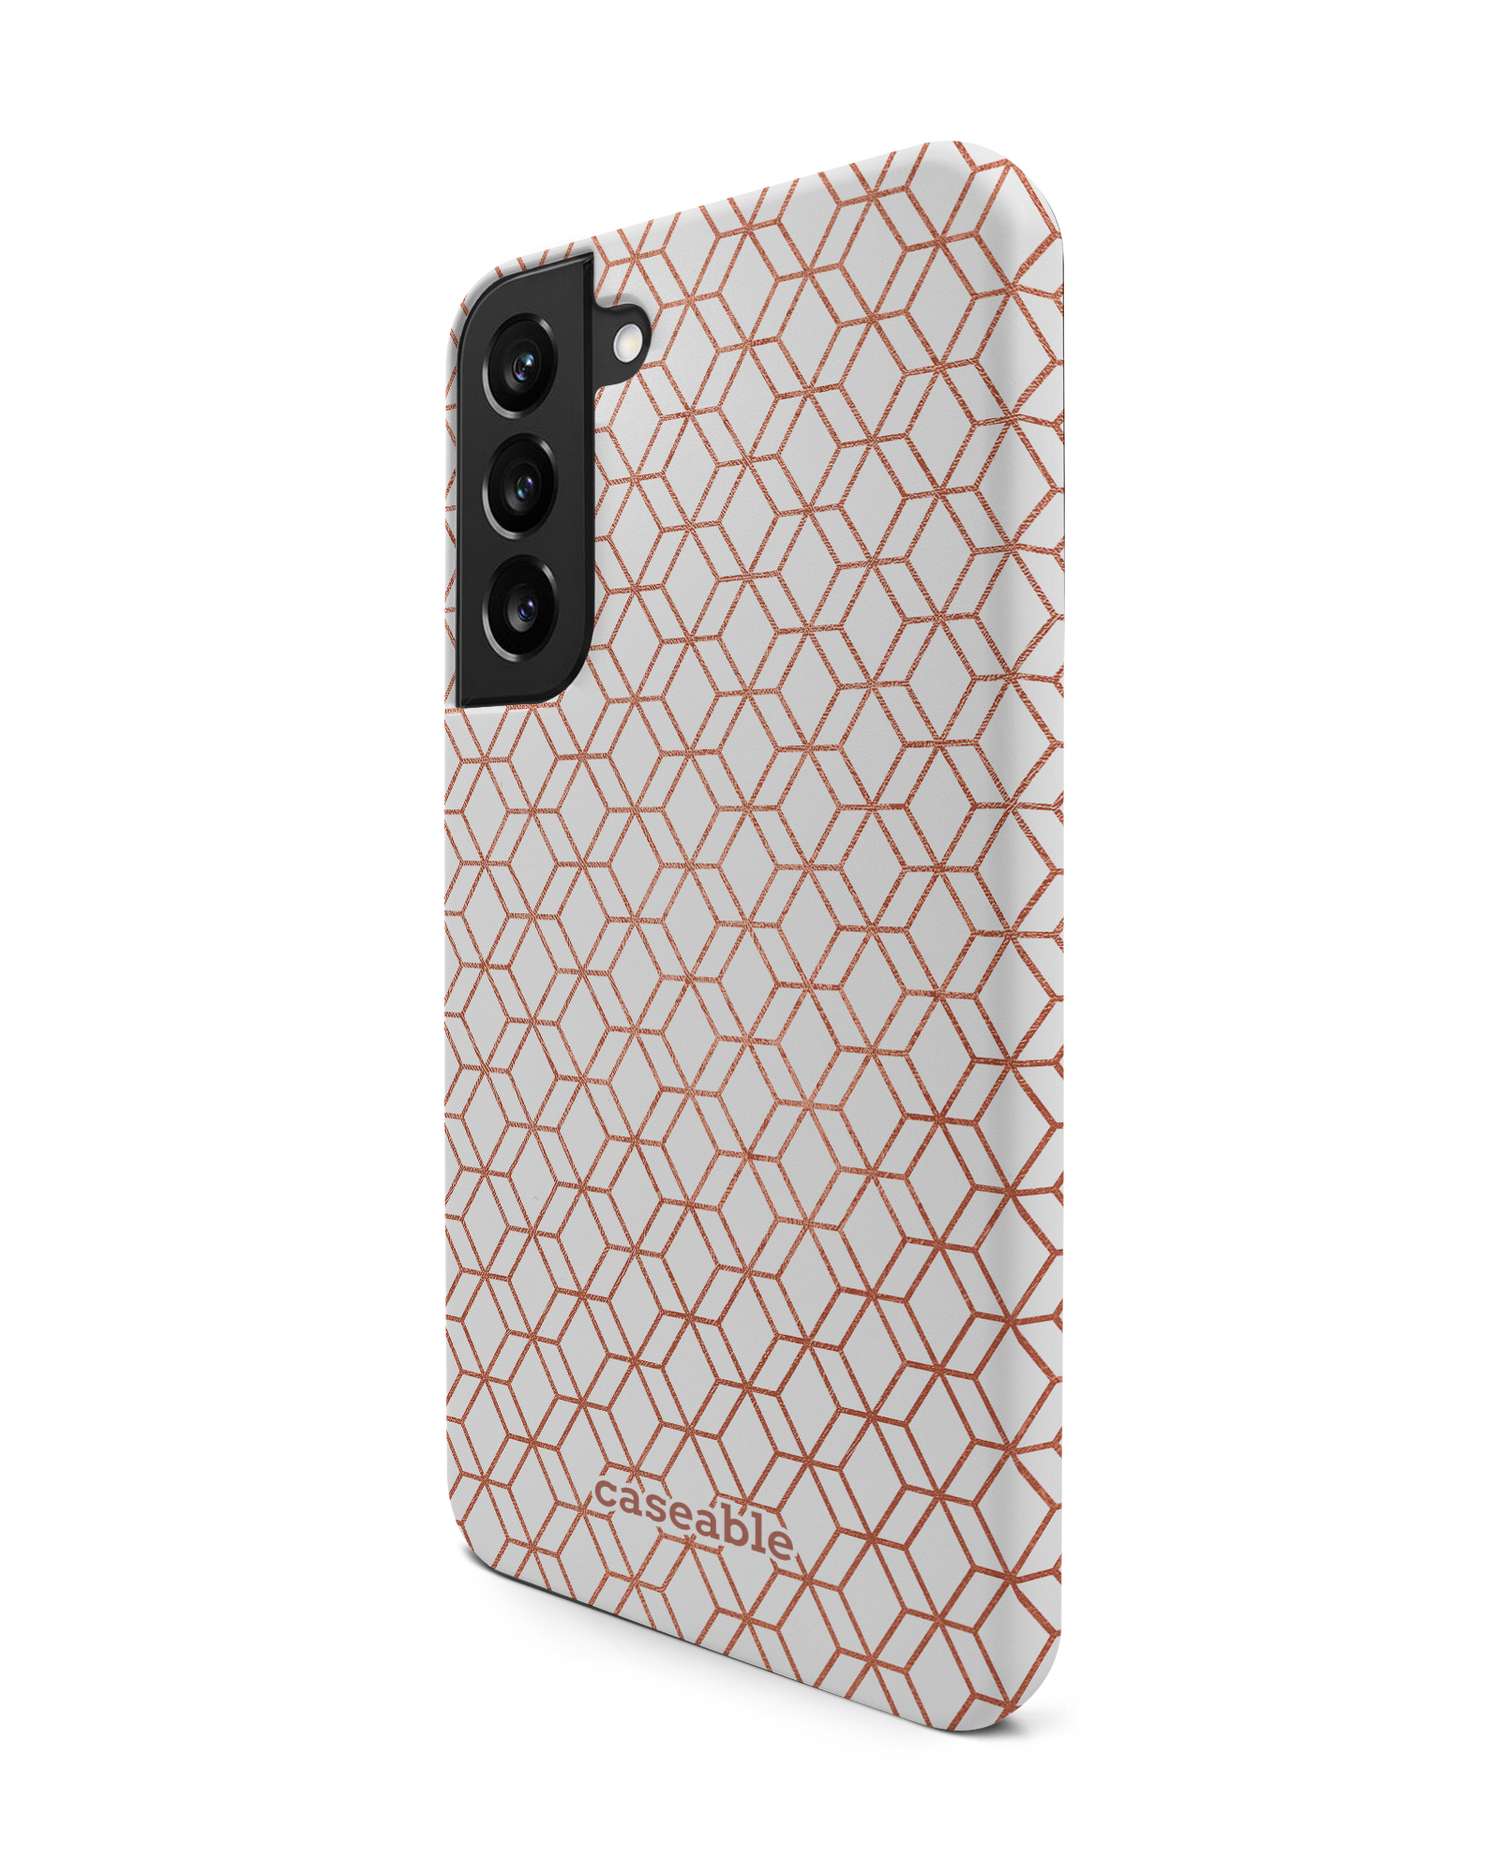 Morning Pattern Premium Phone Case Samsung Galaxy S22 Plus 5G: View from the right side